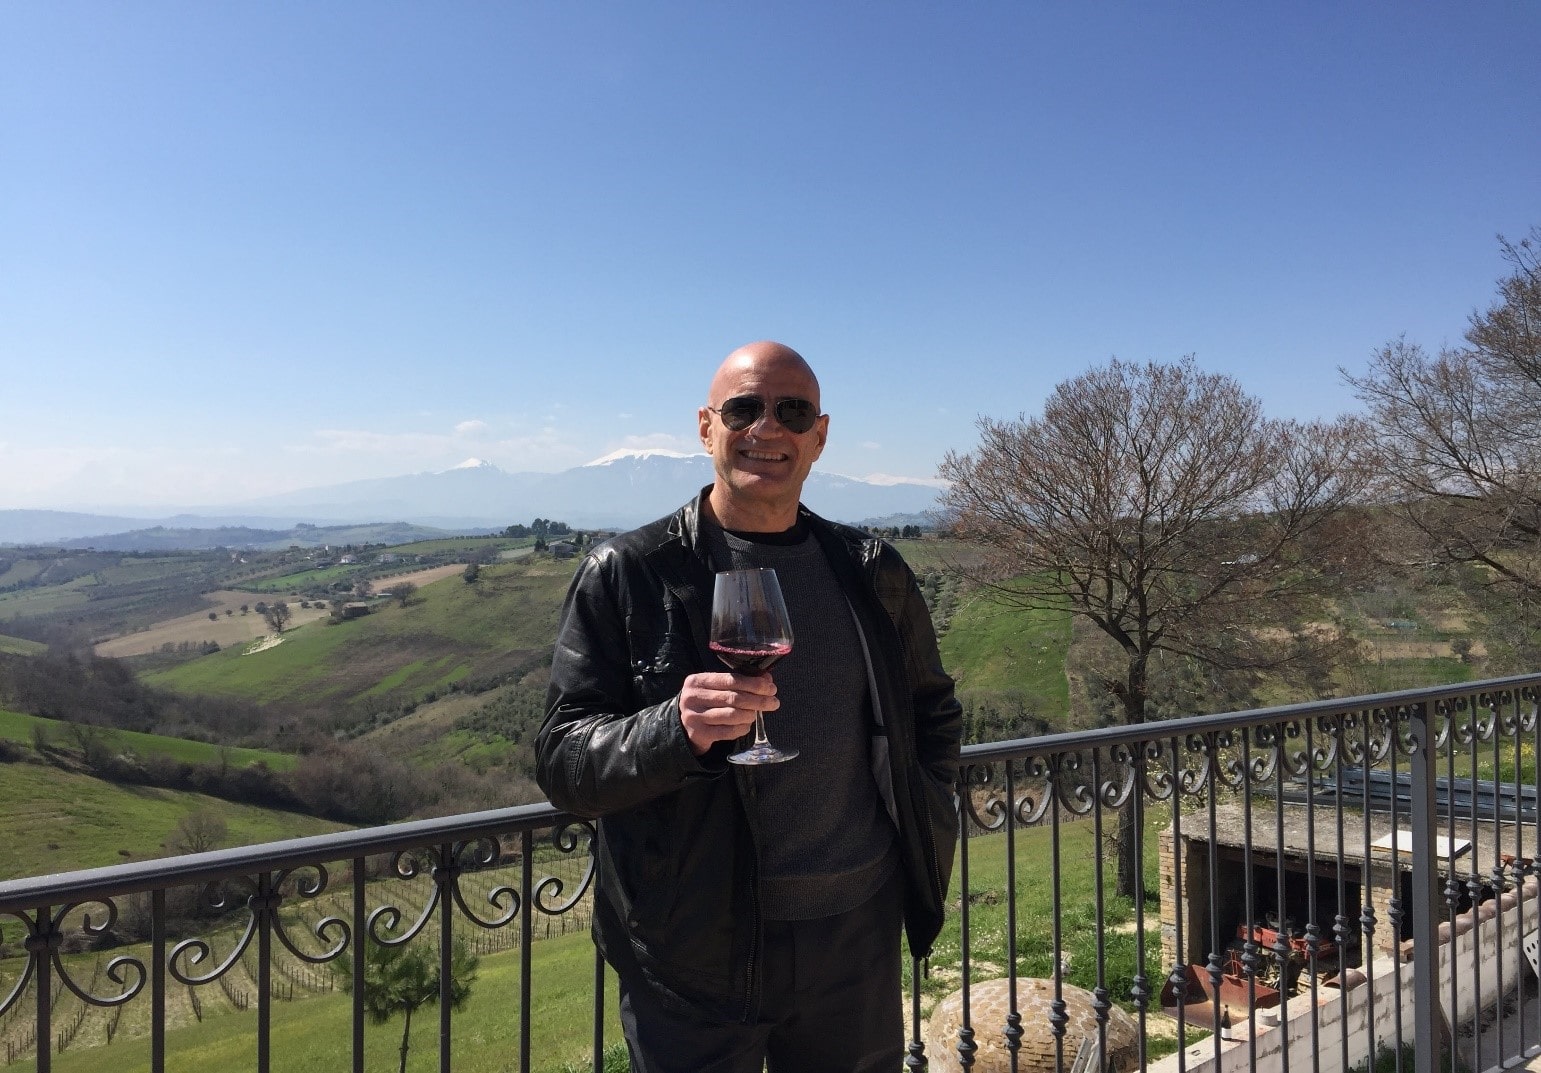 Roberto Capecci Vineyard and the Case for Small Business in Italy